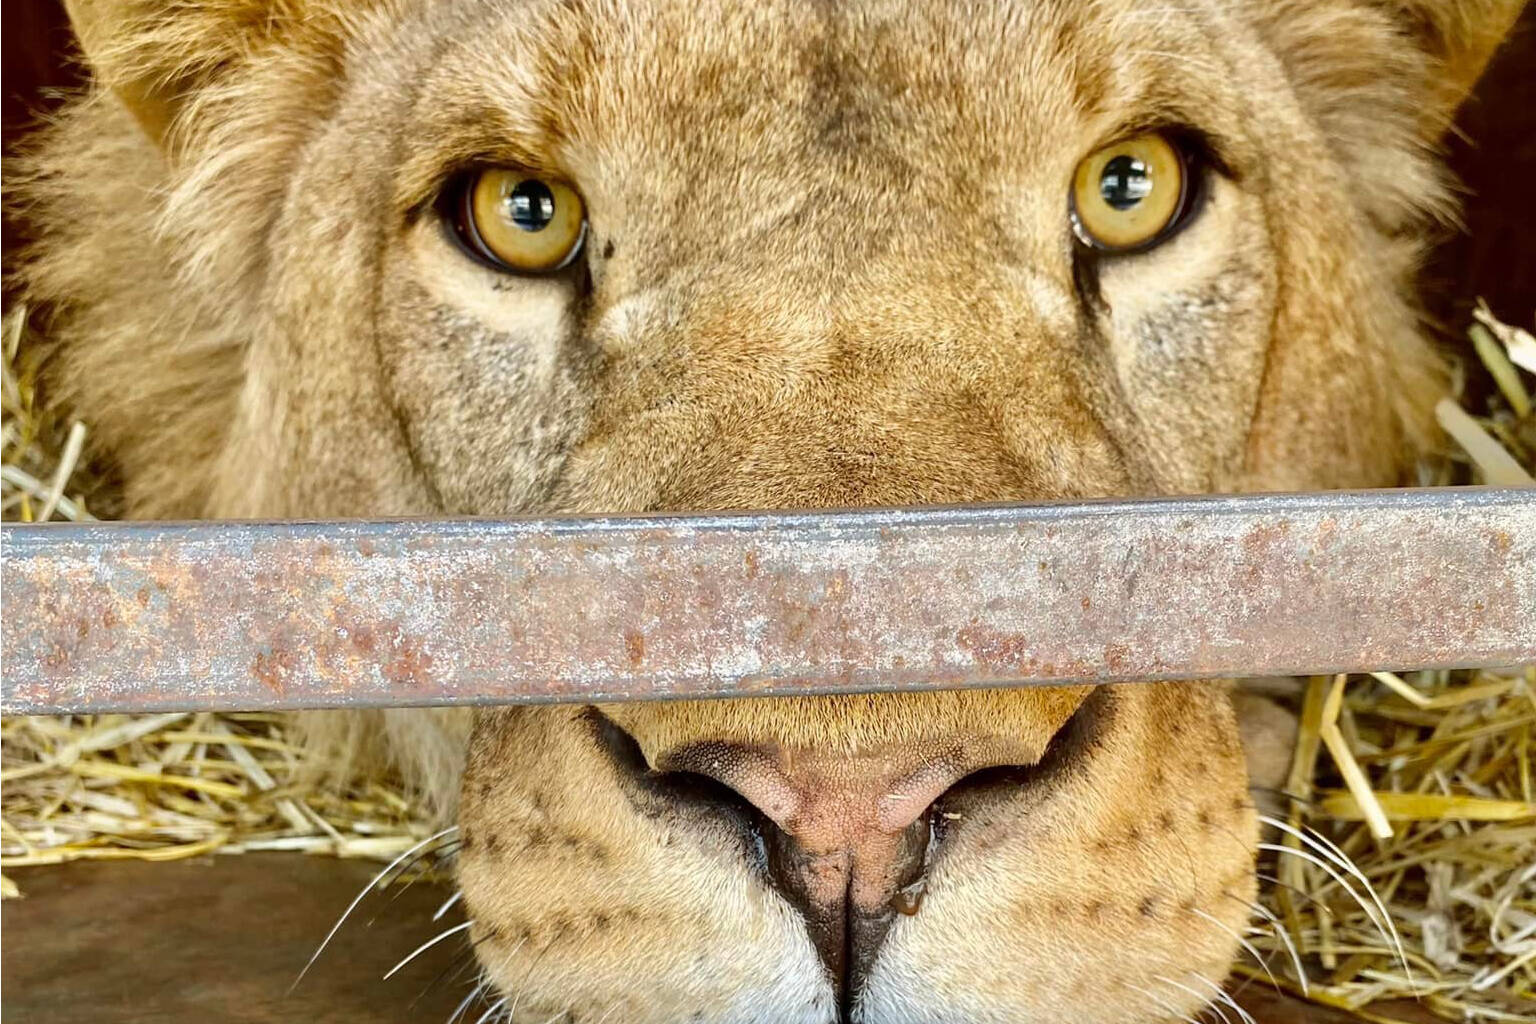 A captive African lion stares out from behind cage bars, a powerful image from Raincoast Dog Rescue Society’s daring mission led by Jesse Adams to rescue nine lions from a war-torn zoo in Ukraine.